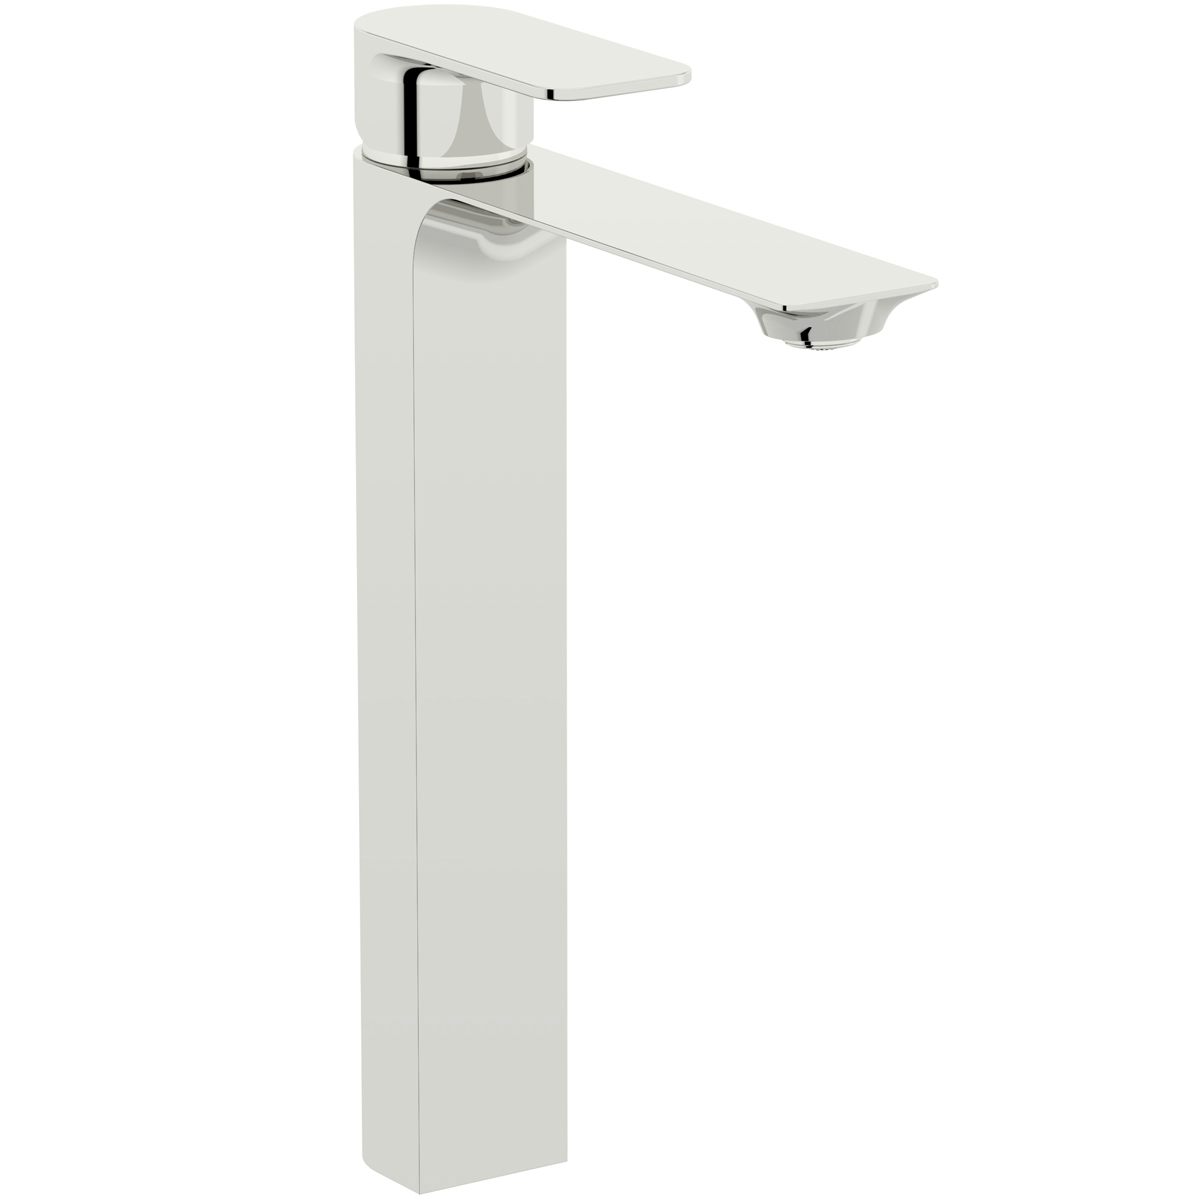 Mode Adler high rise basin mixer tap with unslotted waste